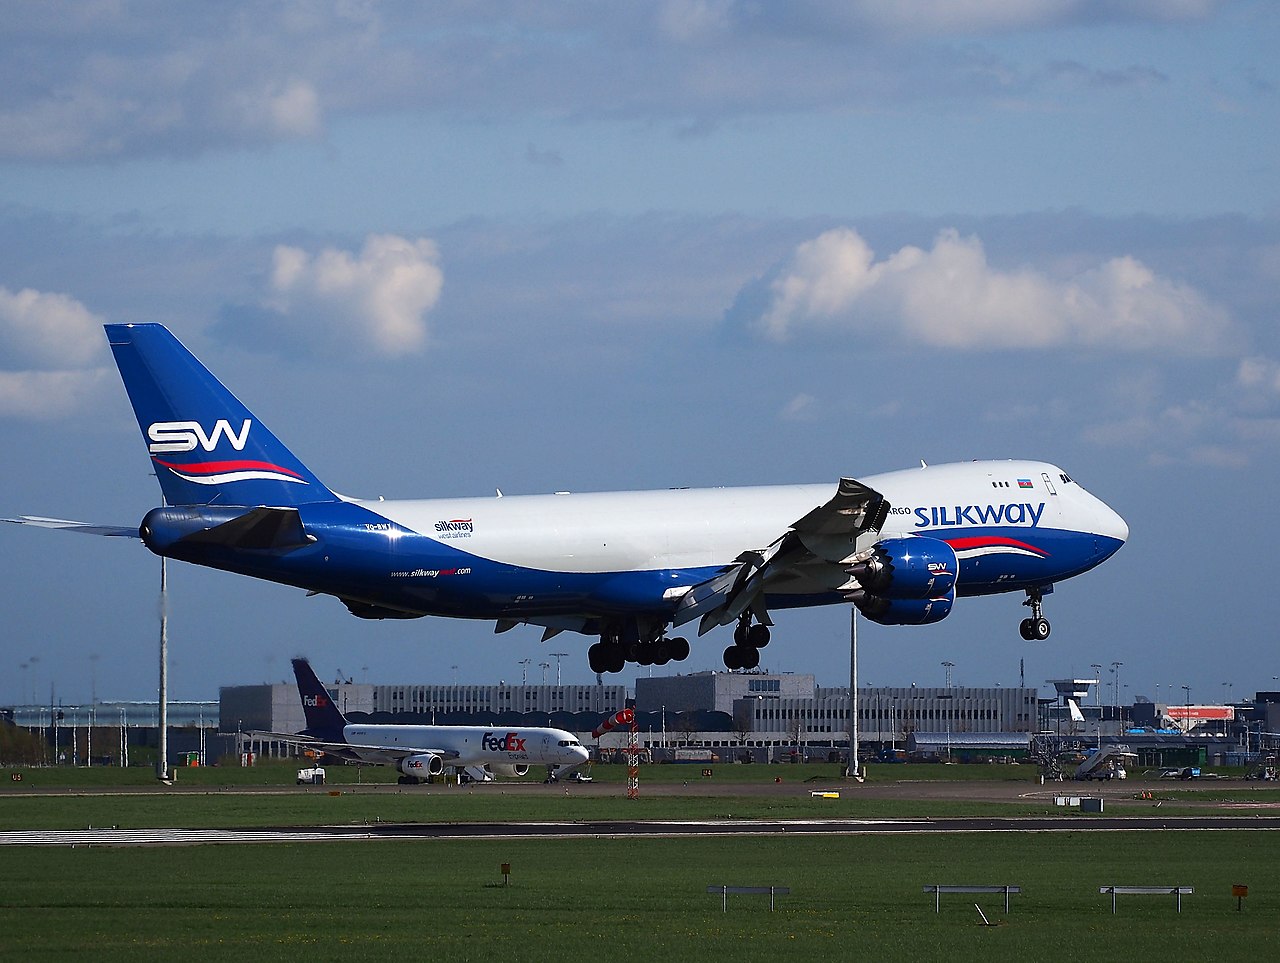 A Silk Way West Airlines Boeing 747 cargo freighter takes off.